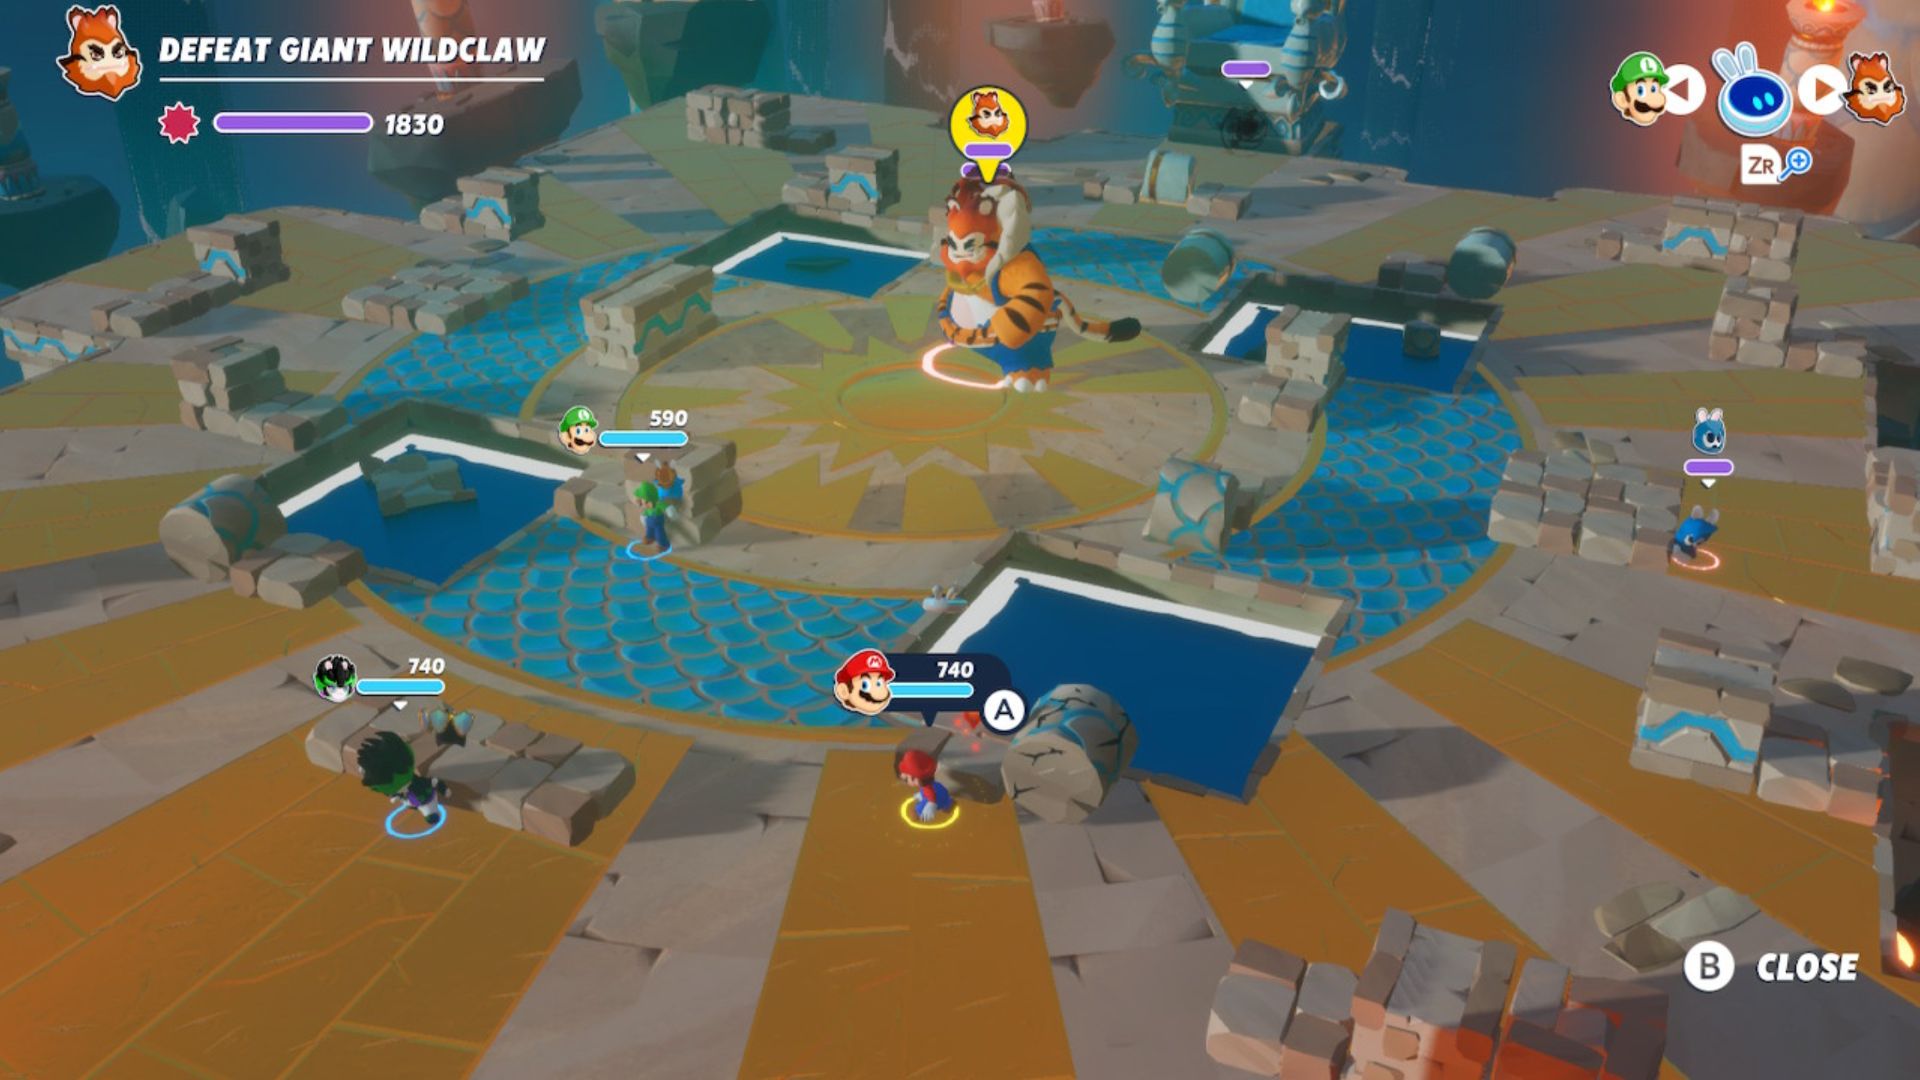 Mario + Rabbids cast battling the Giant Wildclaw boss